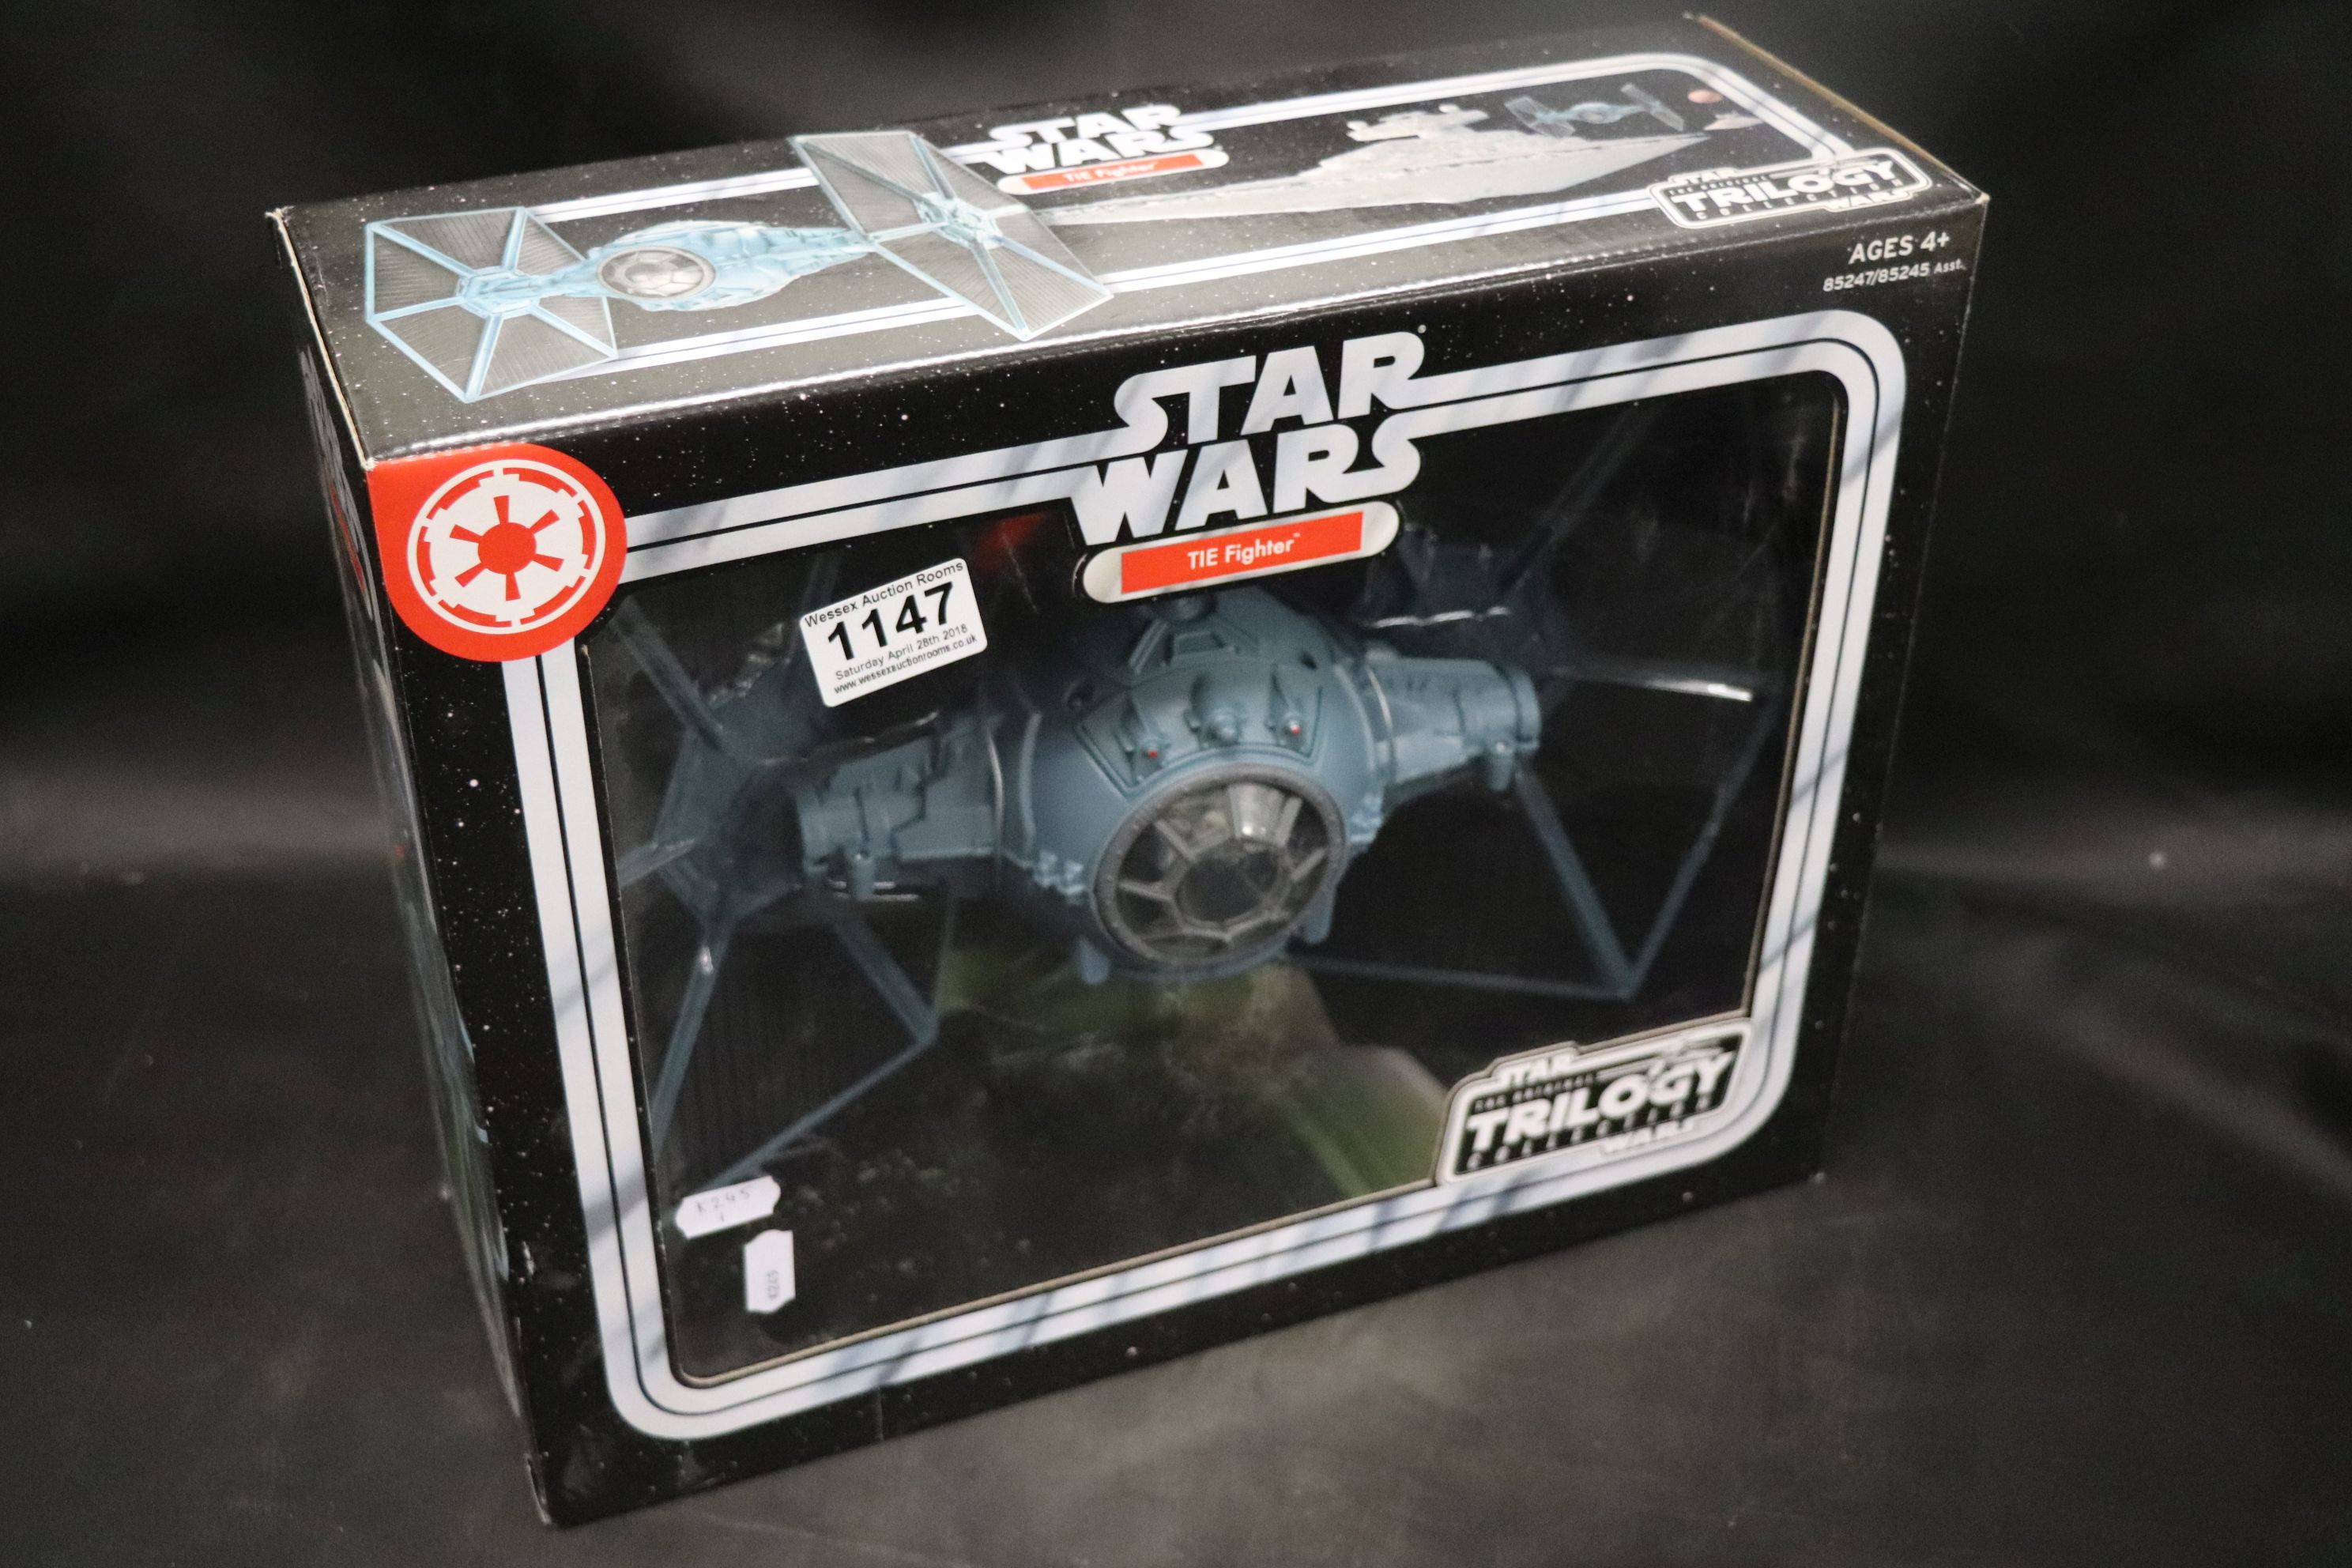 Boxed Hasbro Star Wars Original Trilogy Collection Tie Fighter in excellent condition - Image 3 of 4